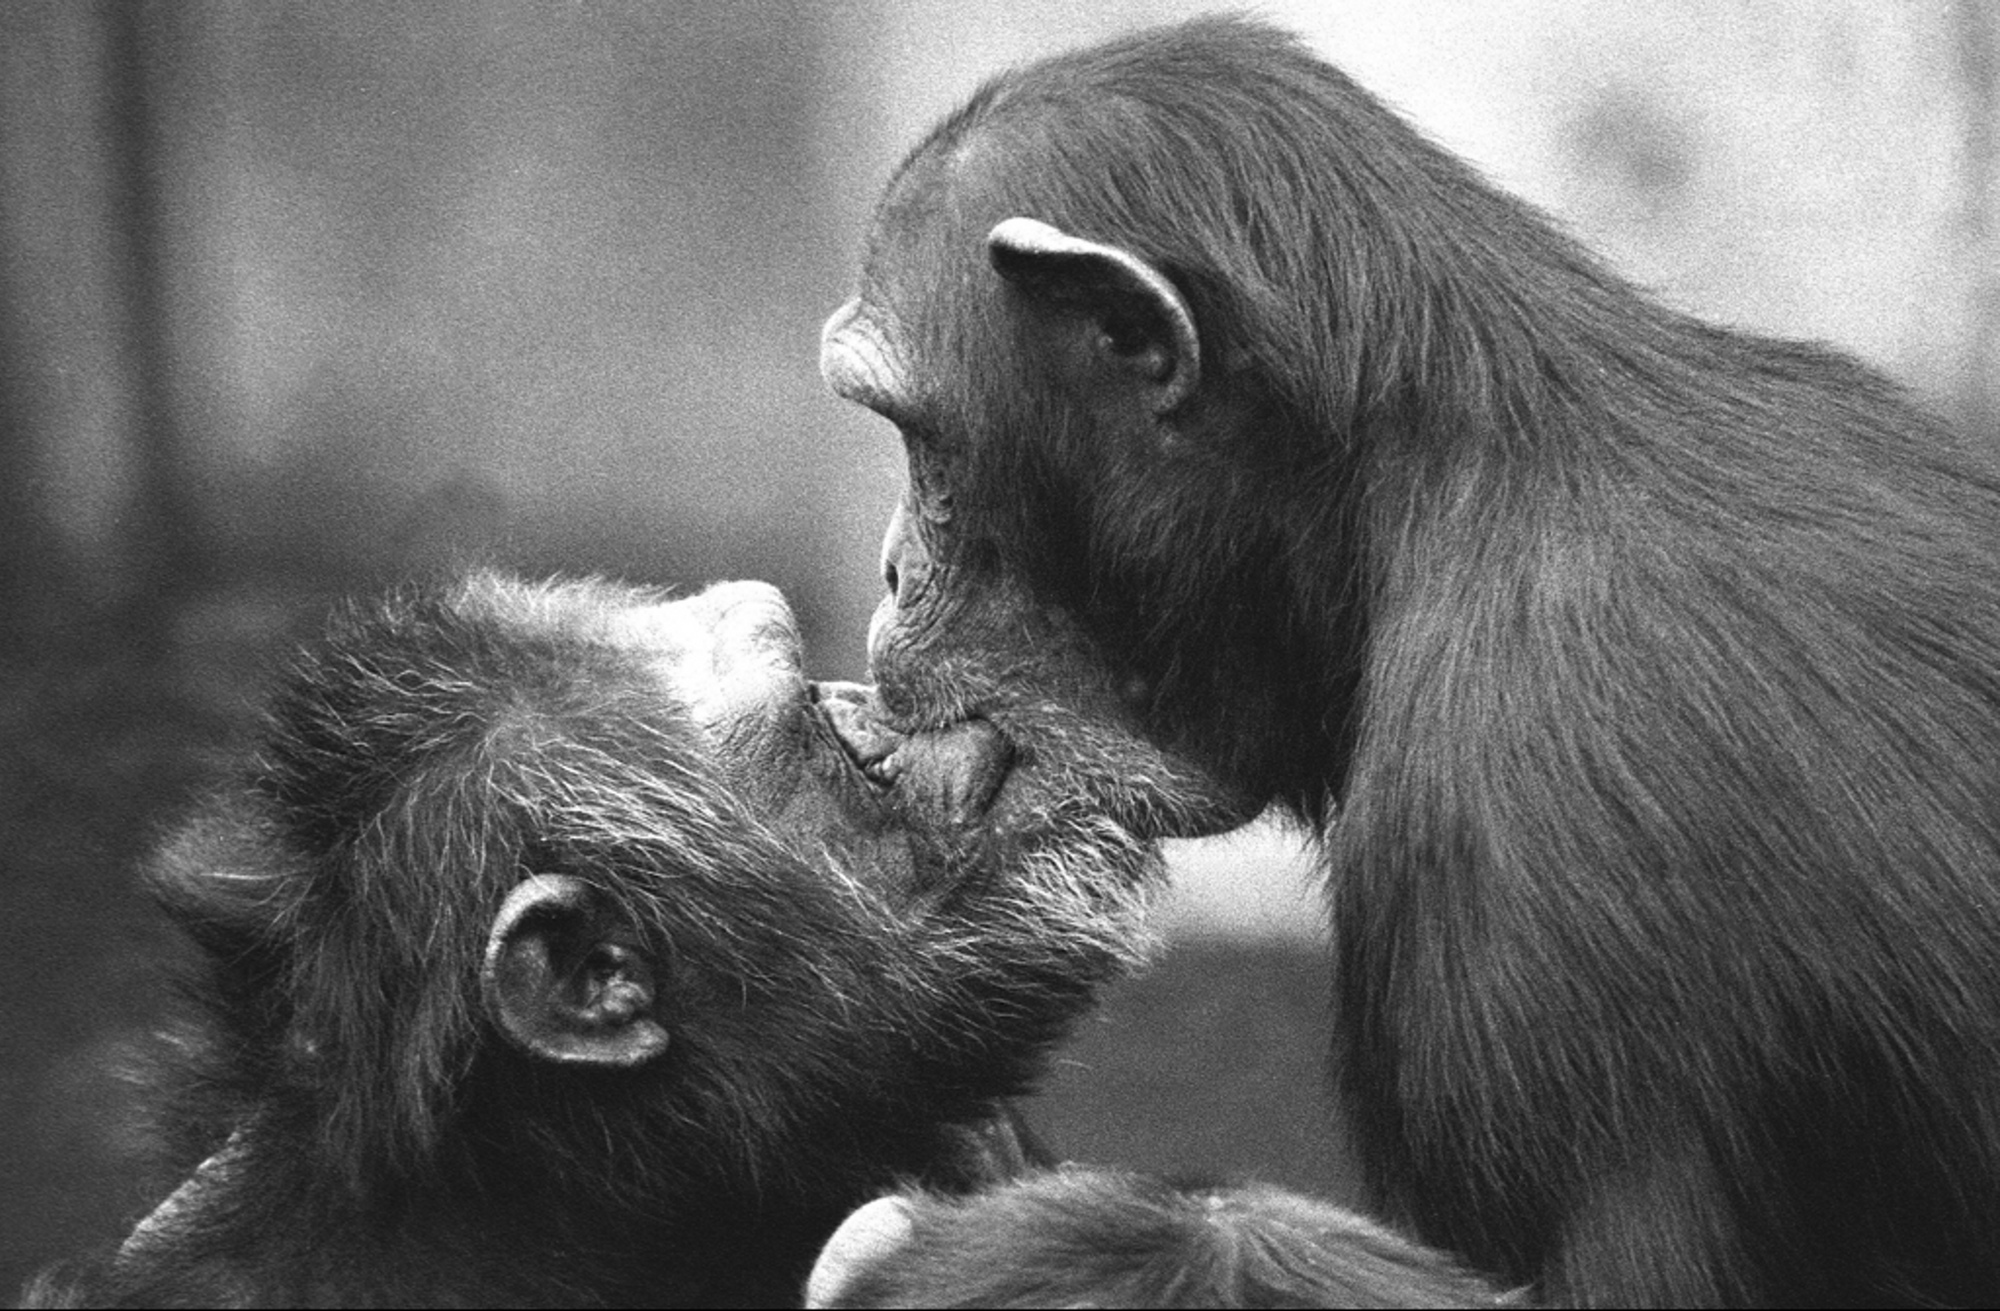 Photo of chimpanzees by Frans de Waal at the Yerkes Primate Center; a female (right) kissing the alpha male on this mouth as a reconciliation.